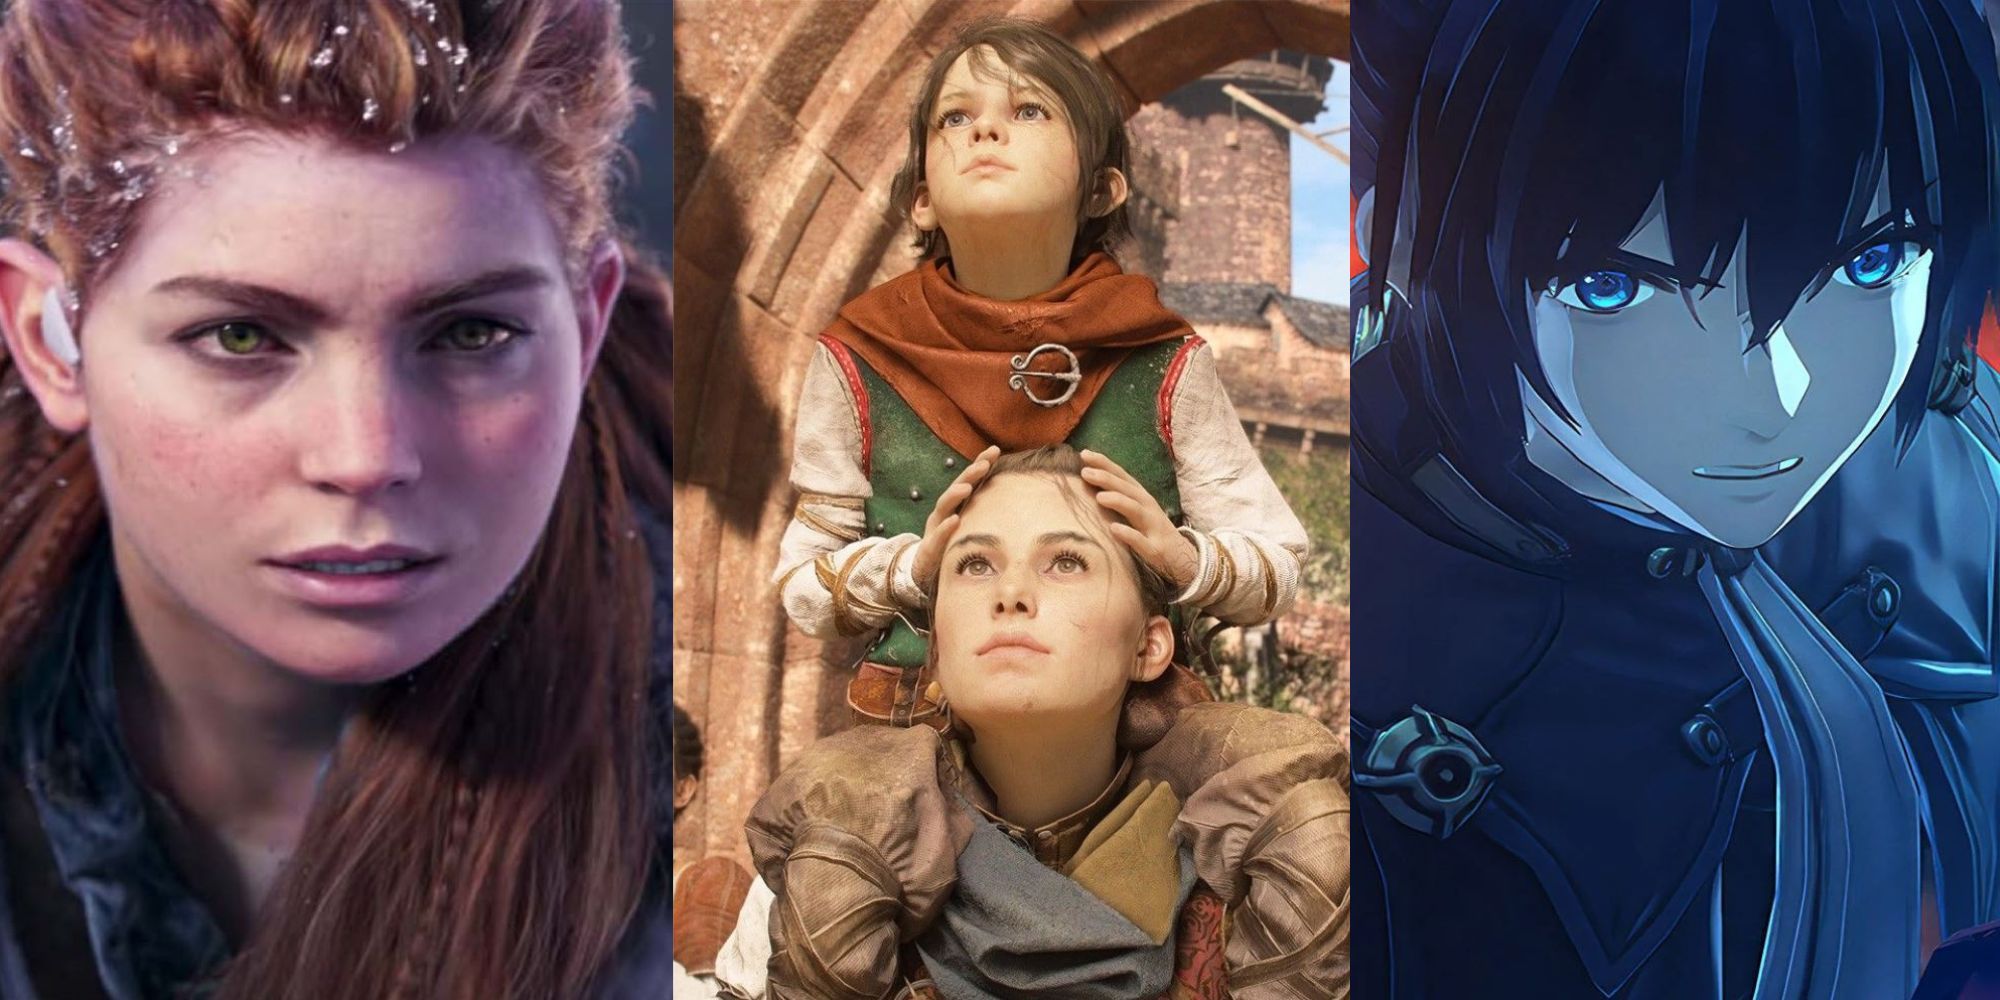 Which 2022 Game Protagonist Are You Based On Your Zodiac Sign featuring Aloy from Horizon Forbidden West, Hugo and Amicia from A Plague Tale: Requiem, and Noah from Xenoblade Chronicles 3